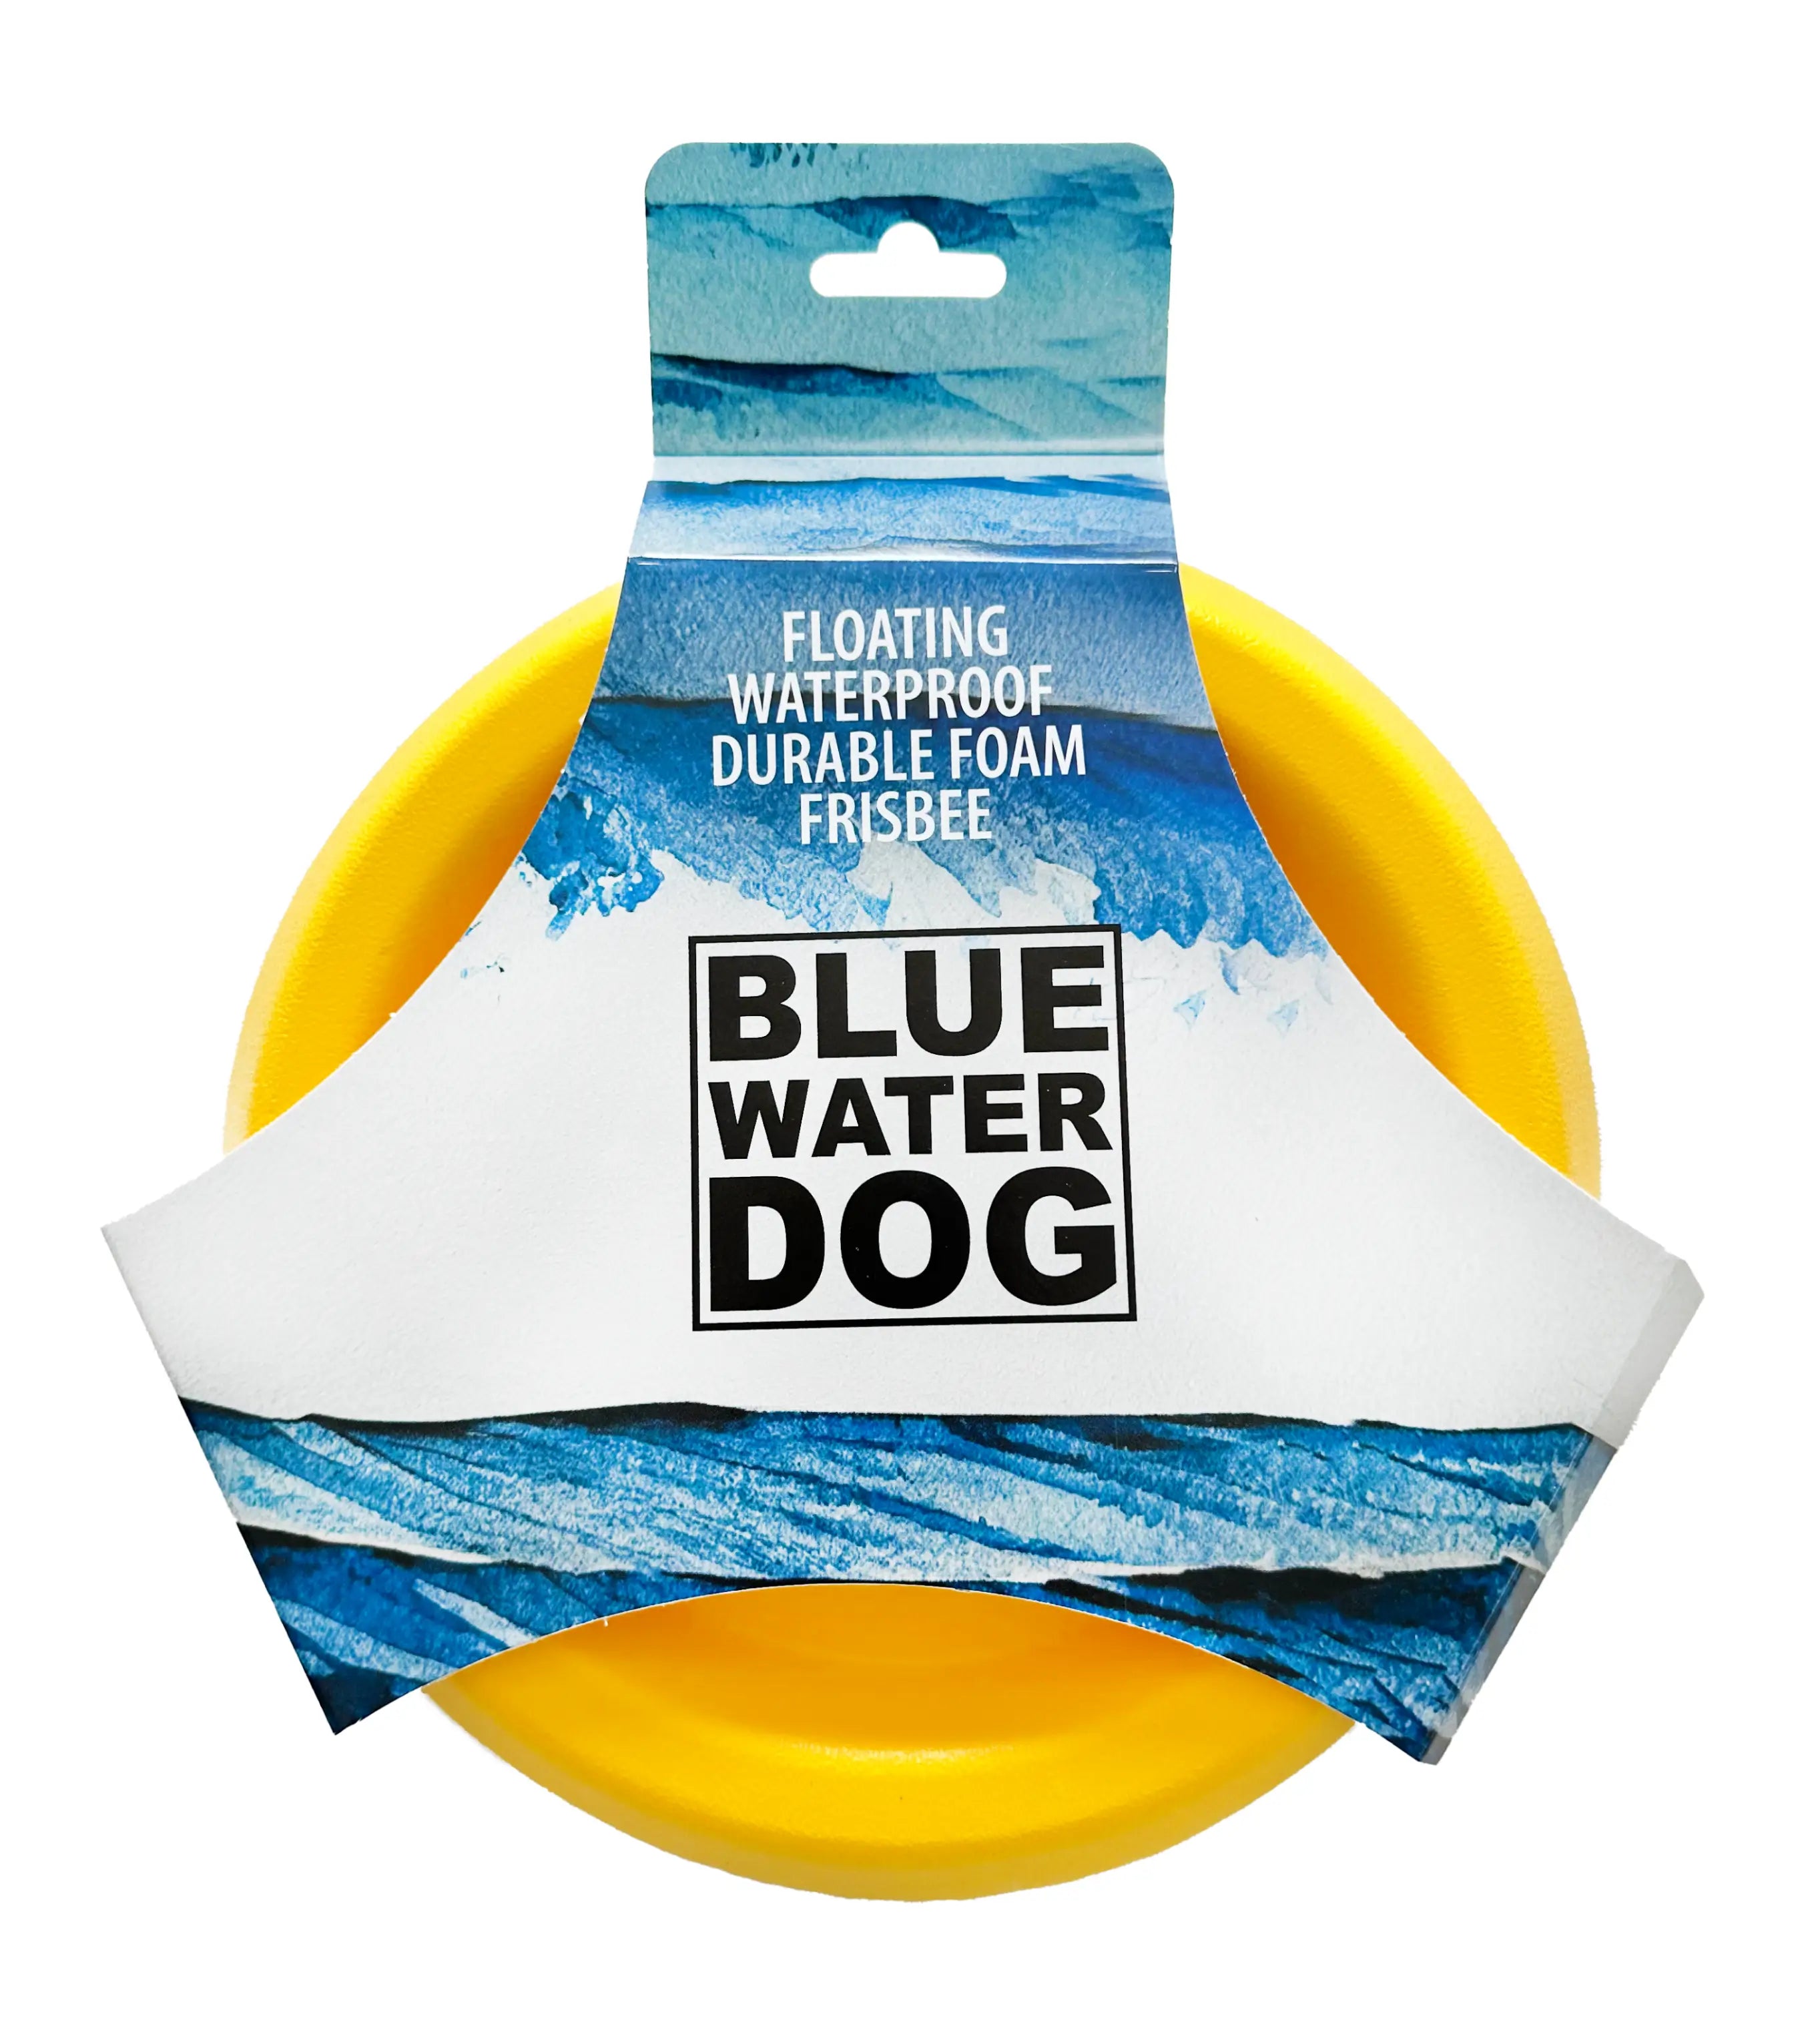 Yellow dog frisbee in packaging.